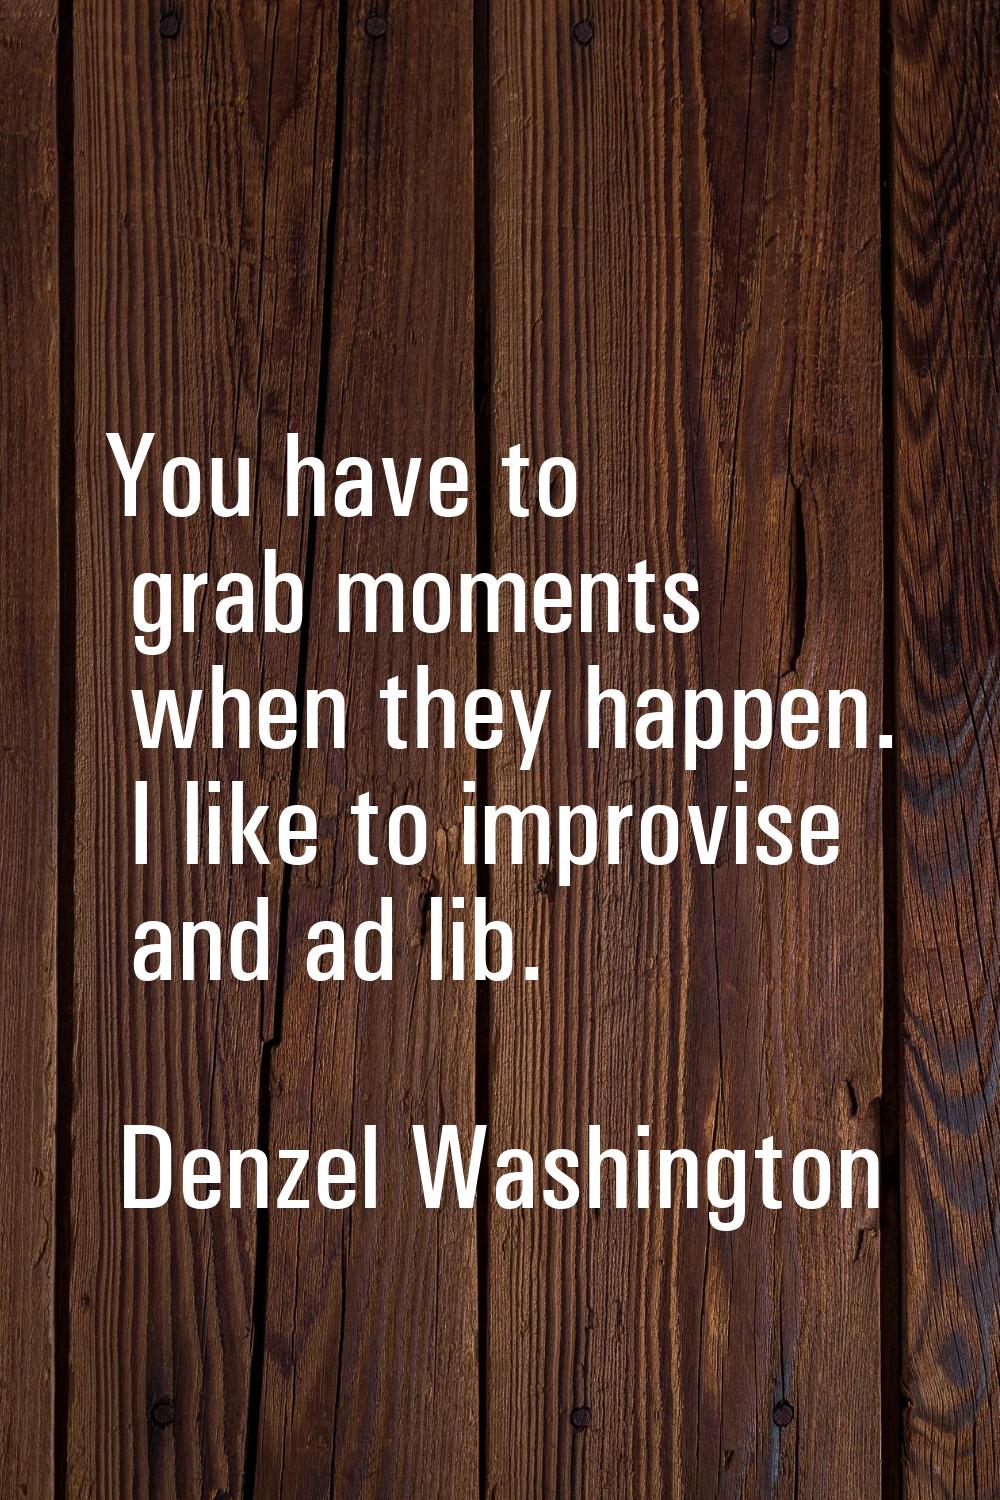 You have to grab moments when they happen. I like to improvise and ad lib.